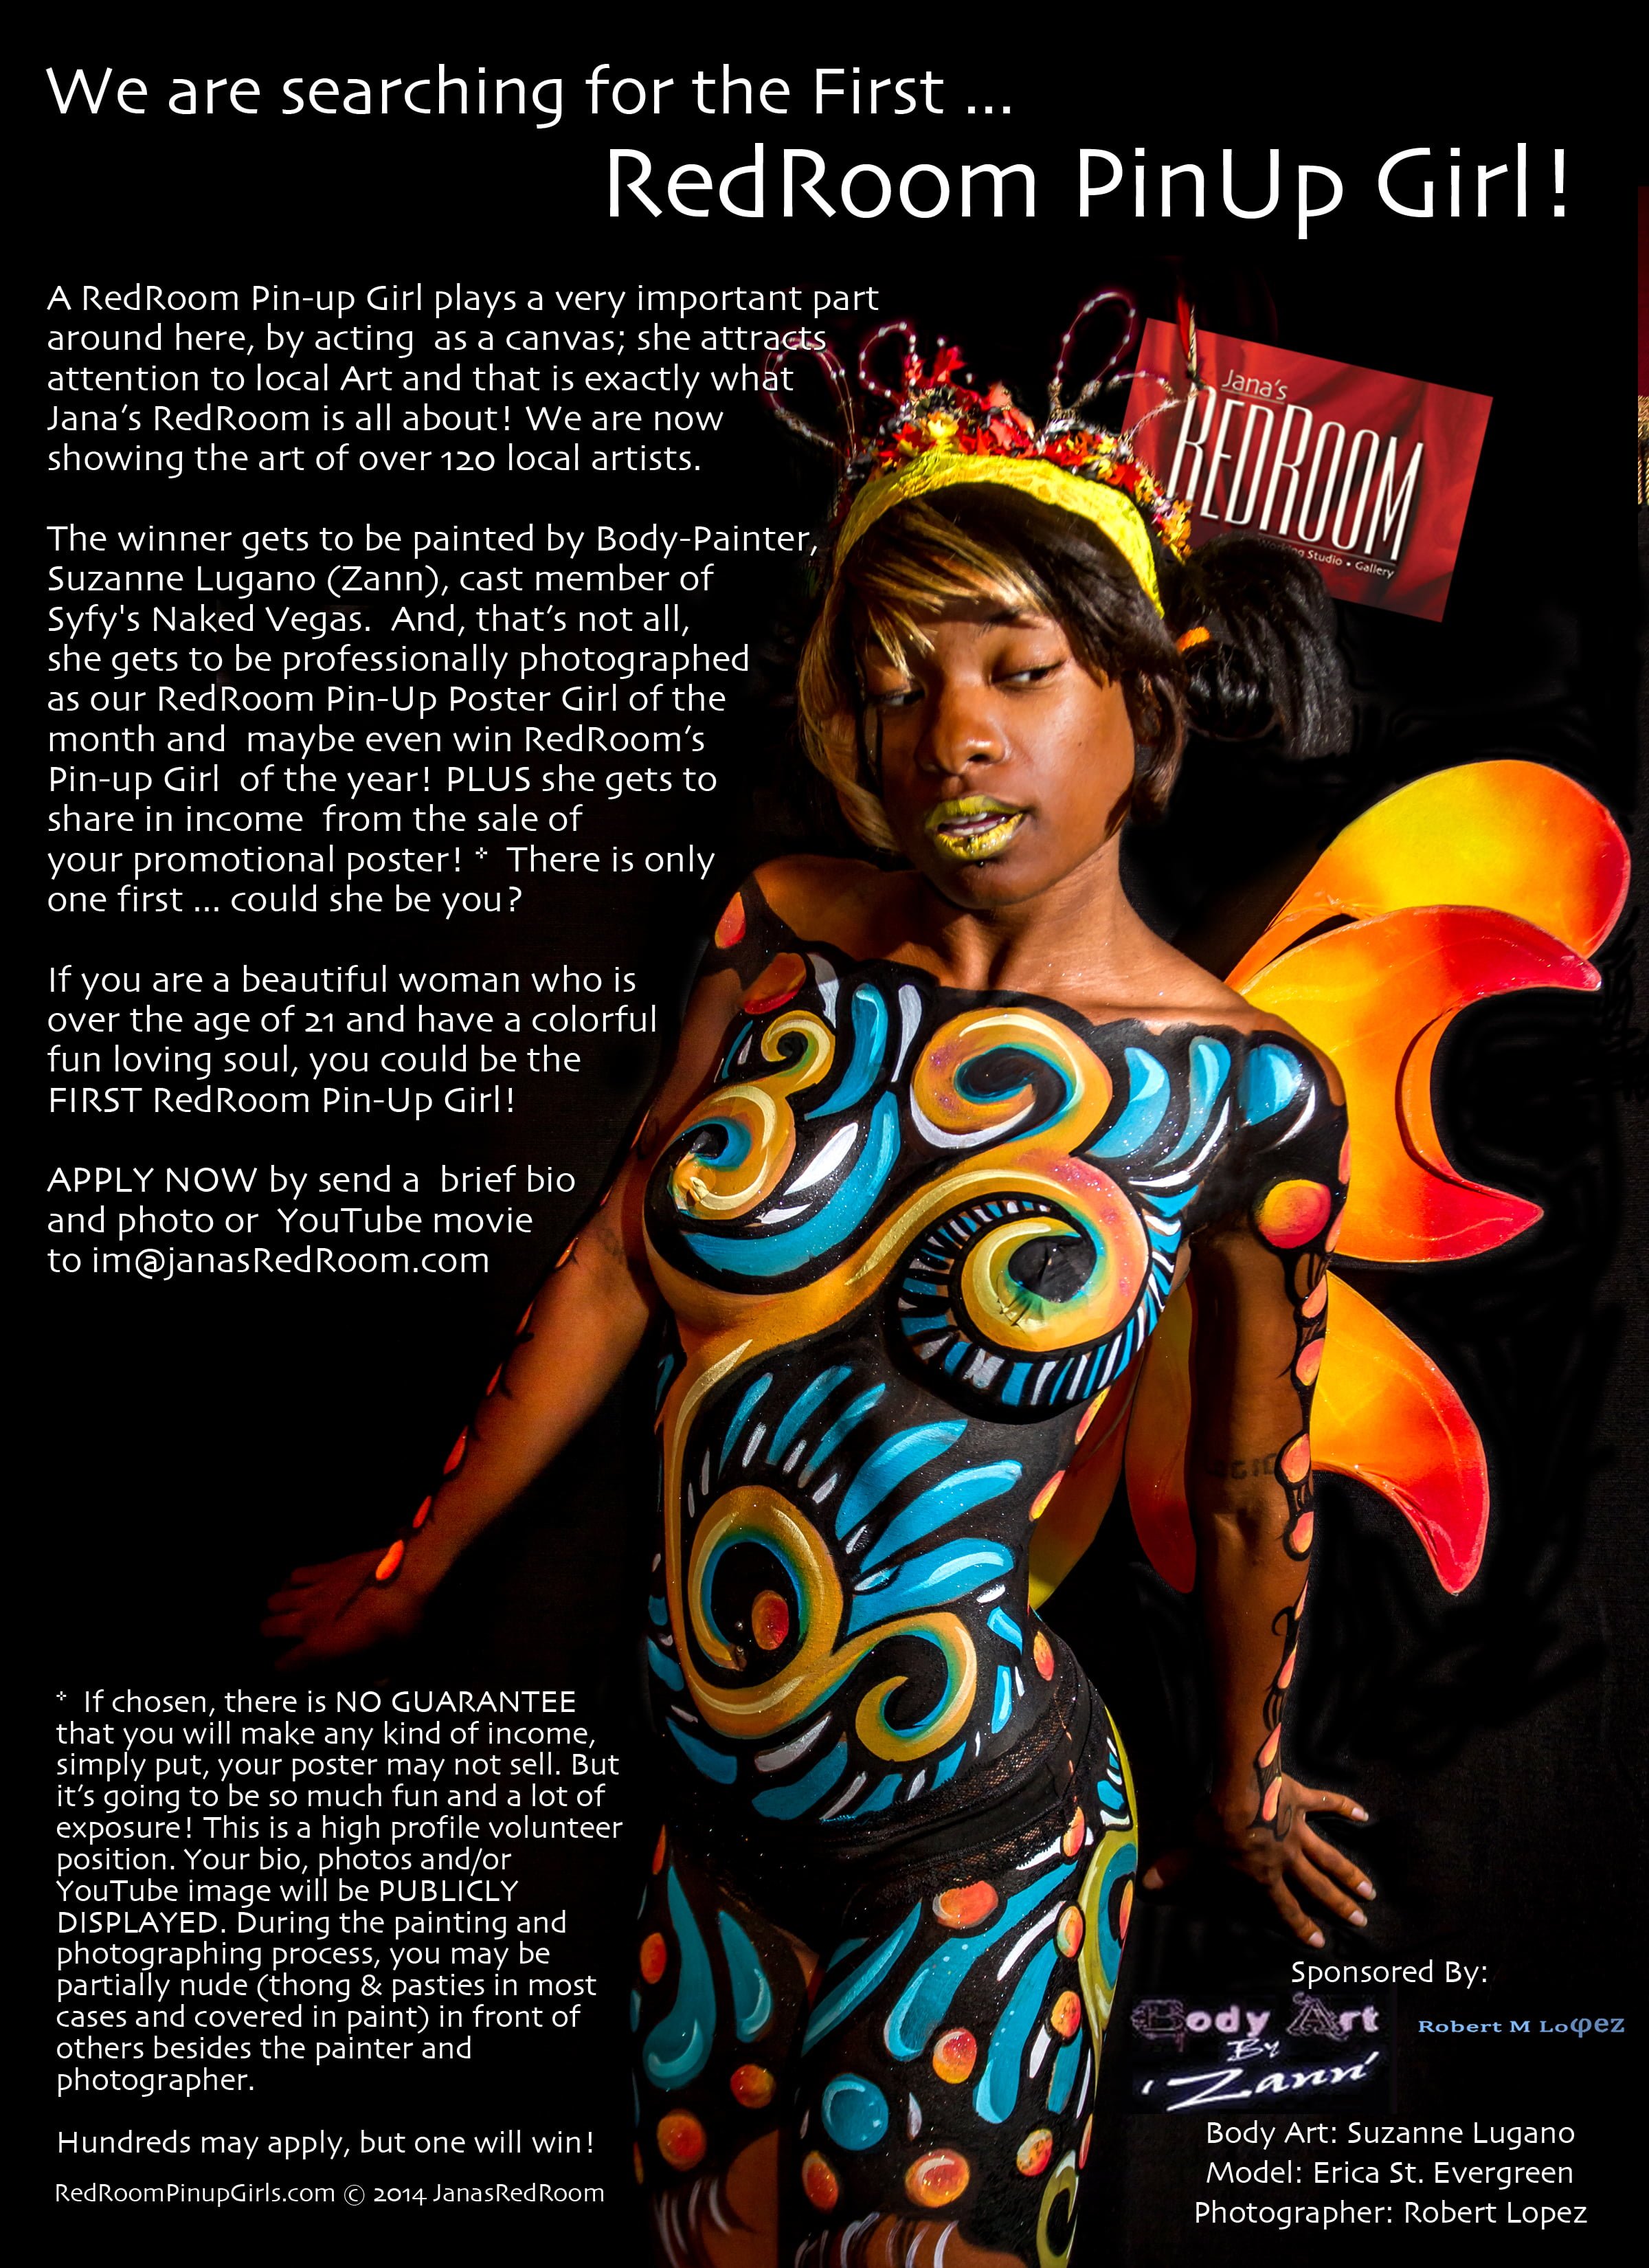 Wanna be body painted? Apply TODAY!!